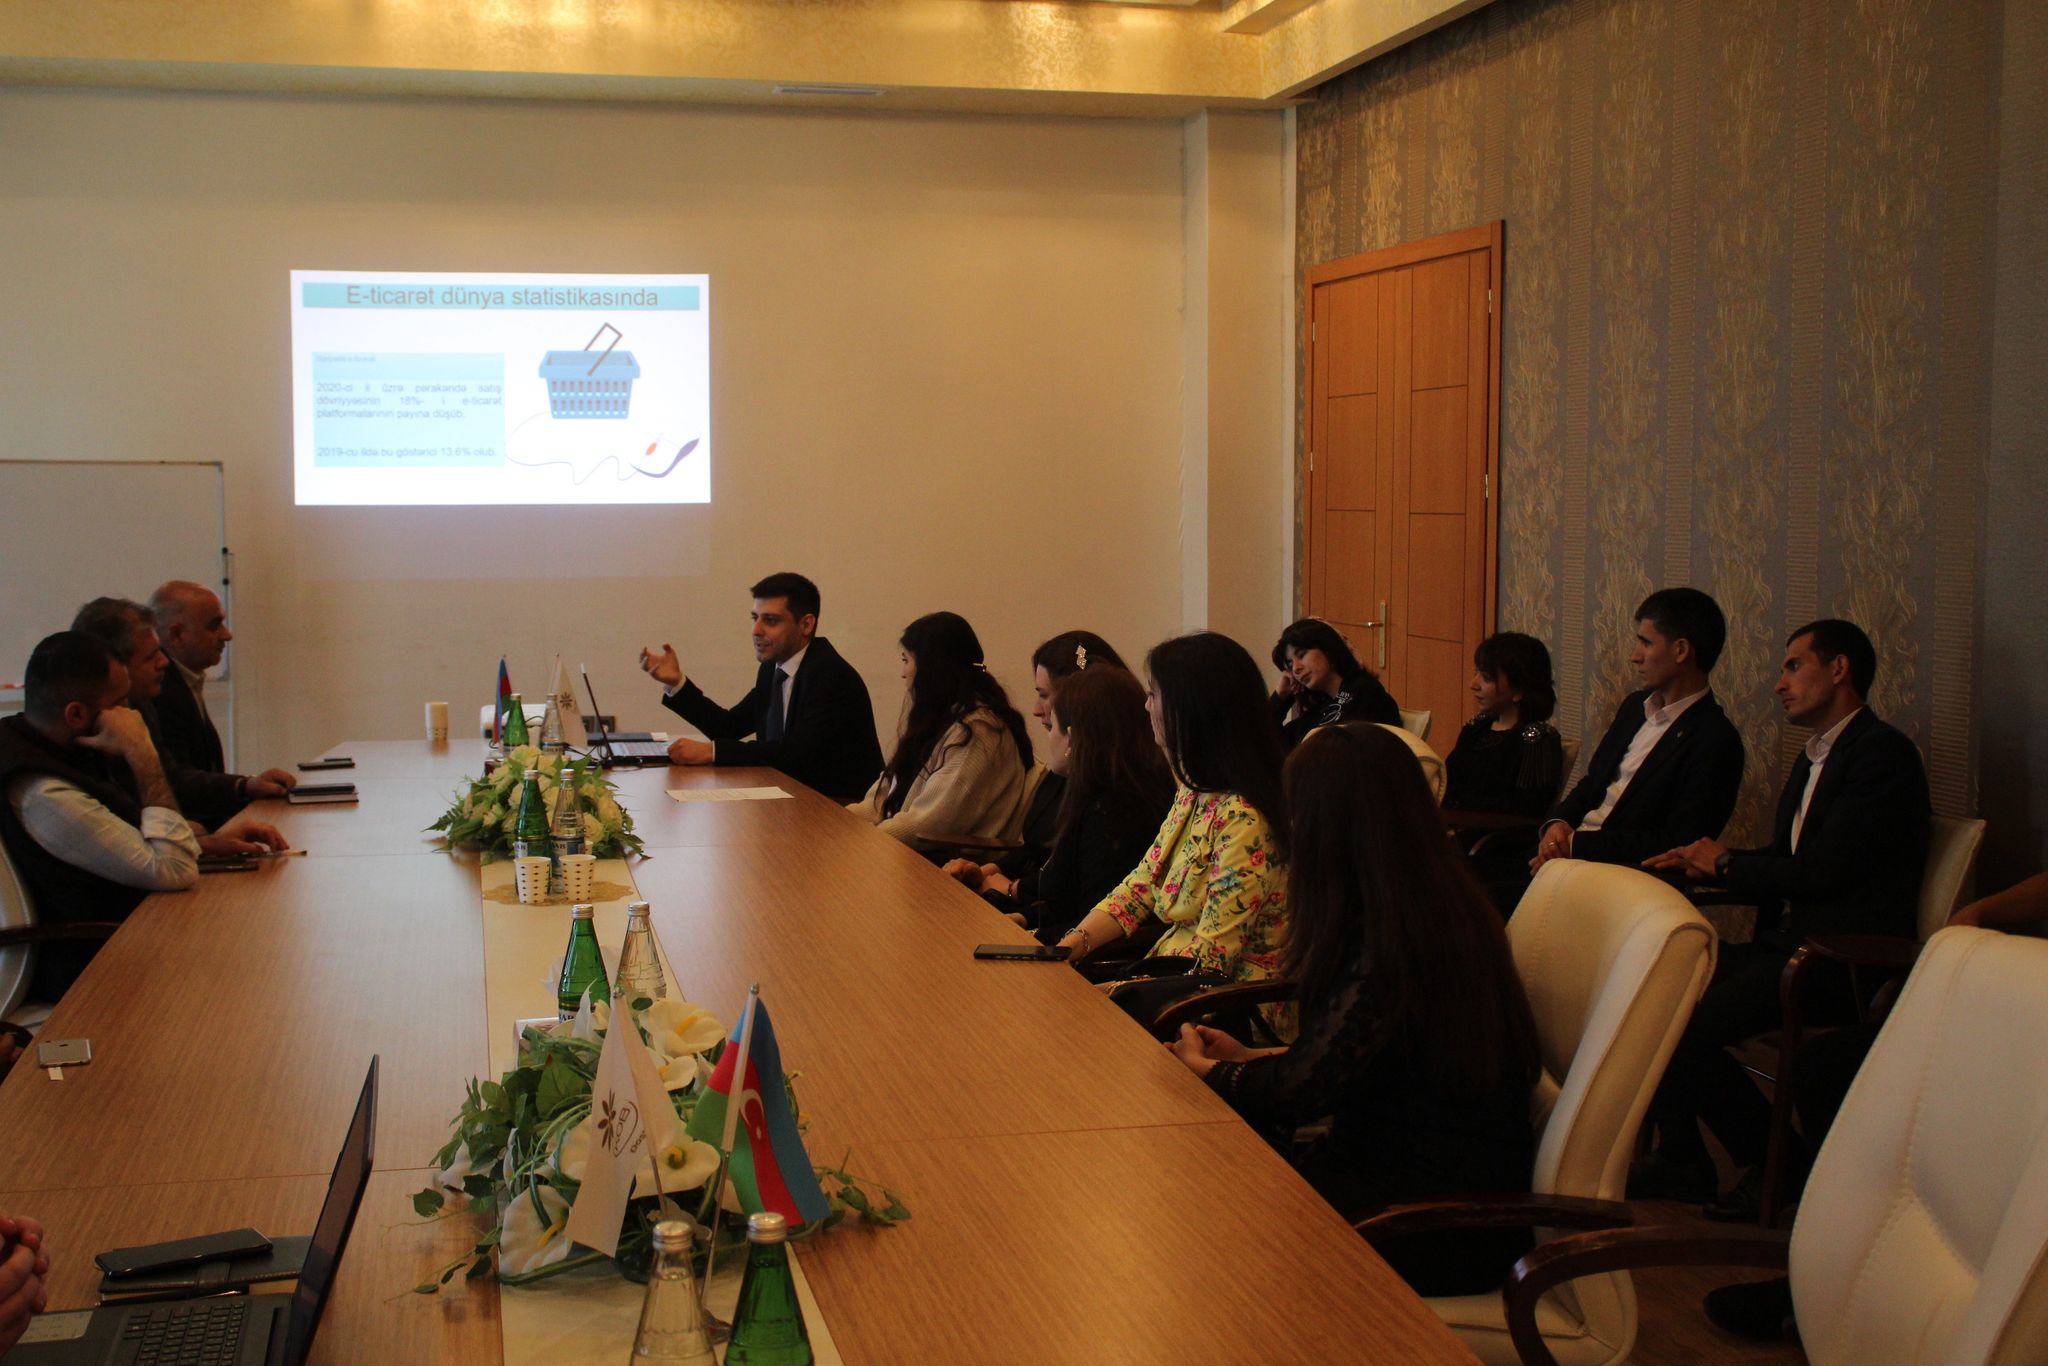 The Azexport.az portal met with entrepreneurs and youth of Imishli region